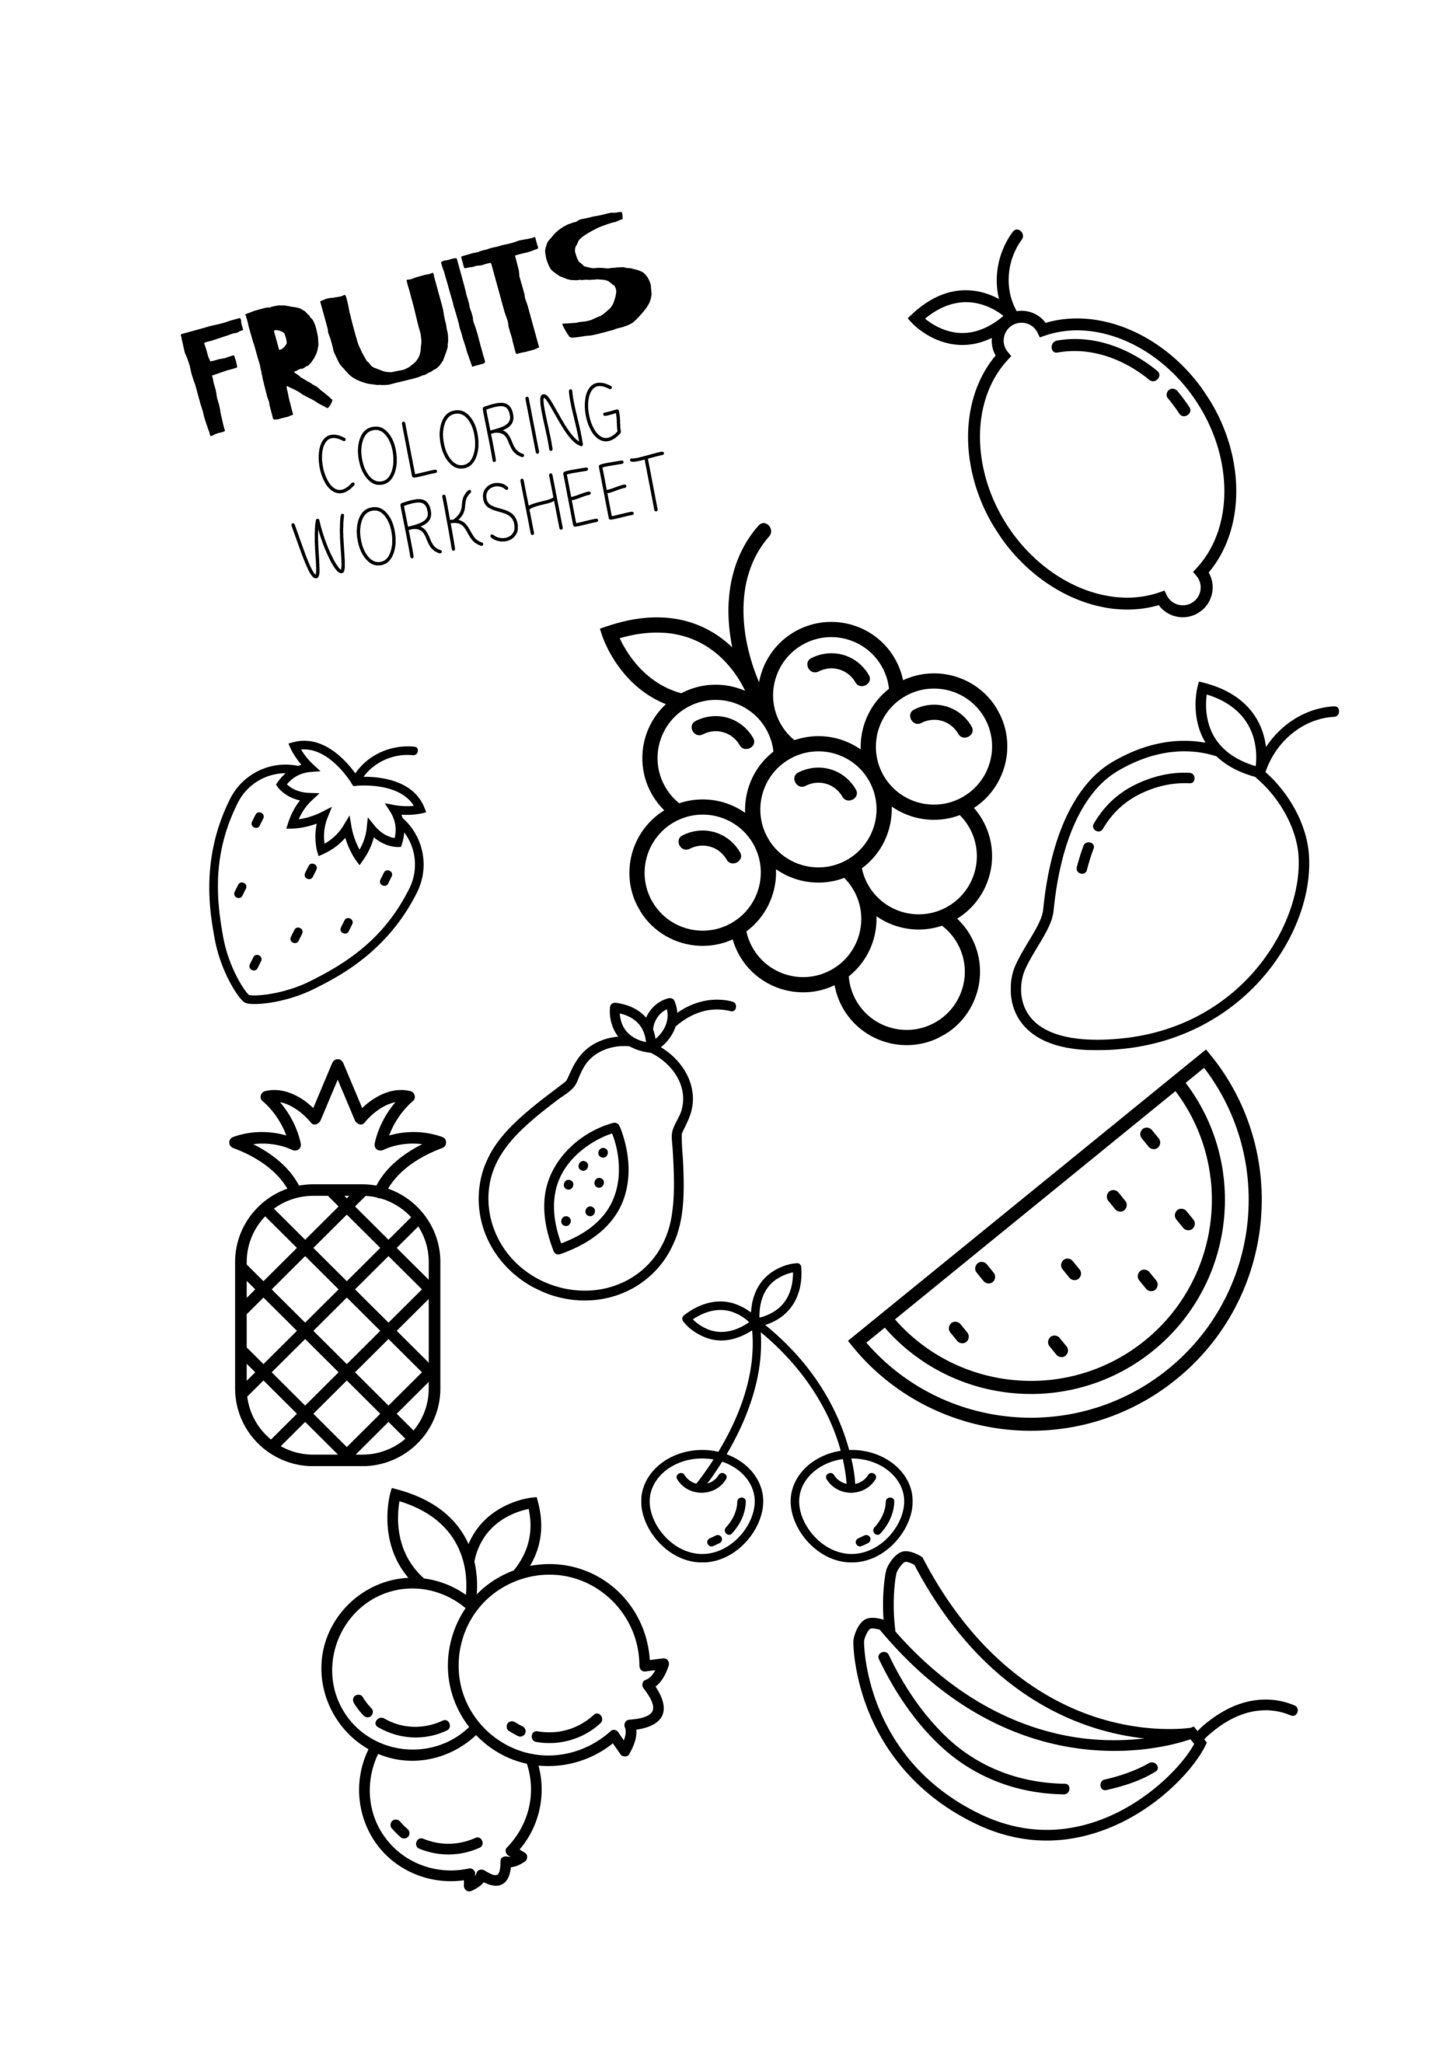 11+ Coloring Pages of Fruits - Free Preschool